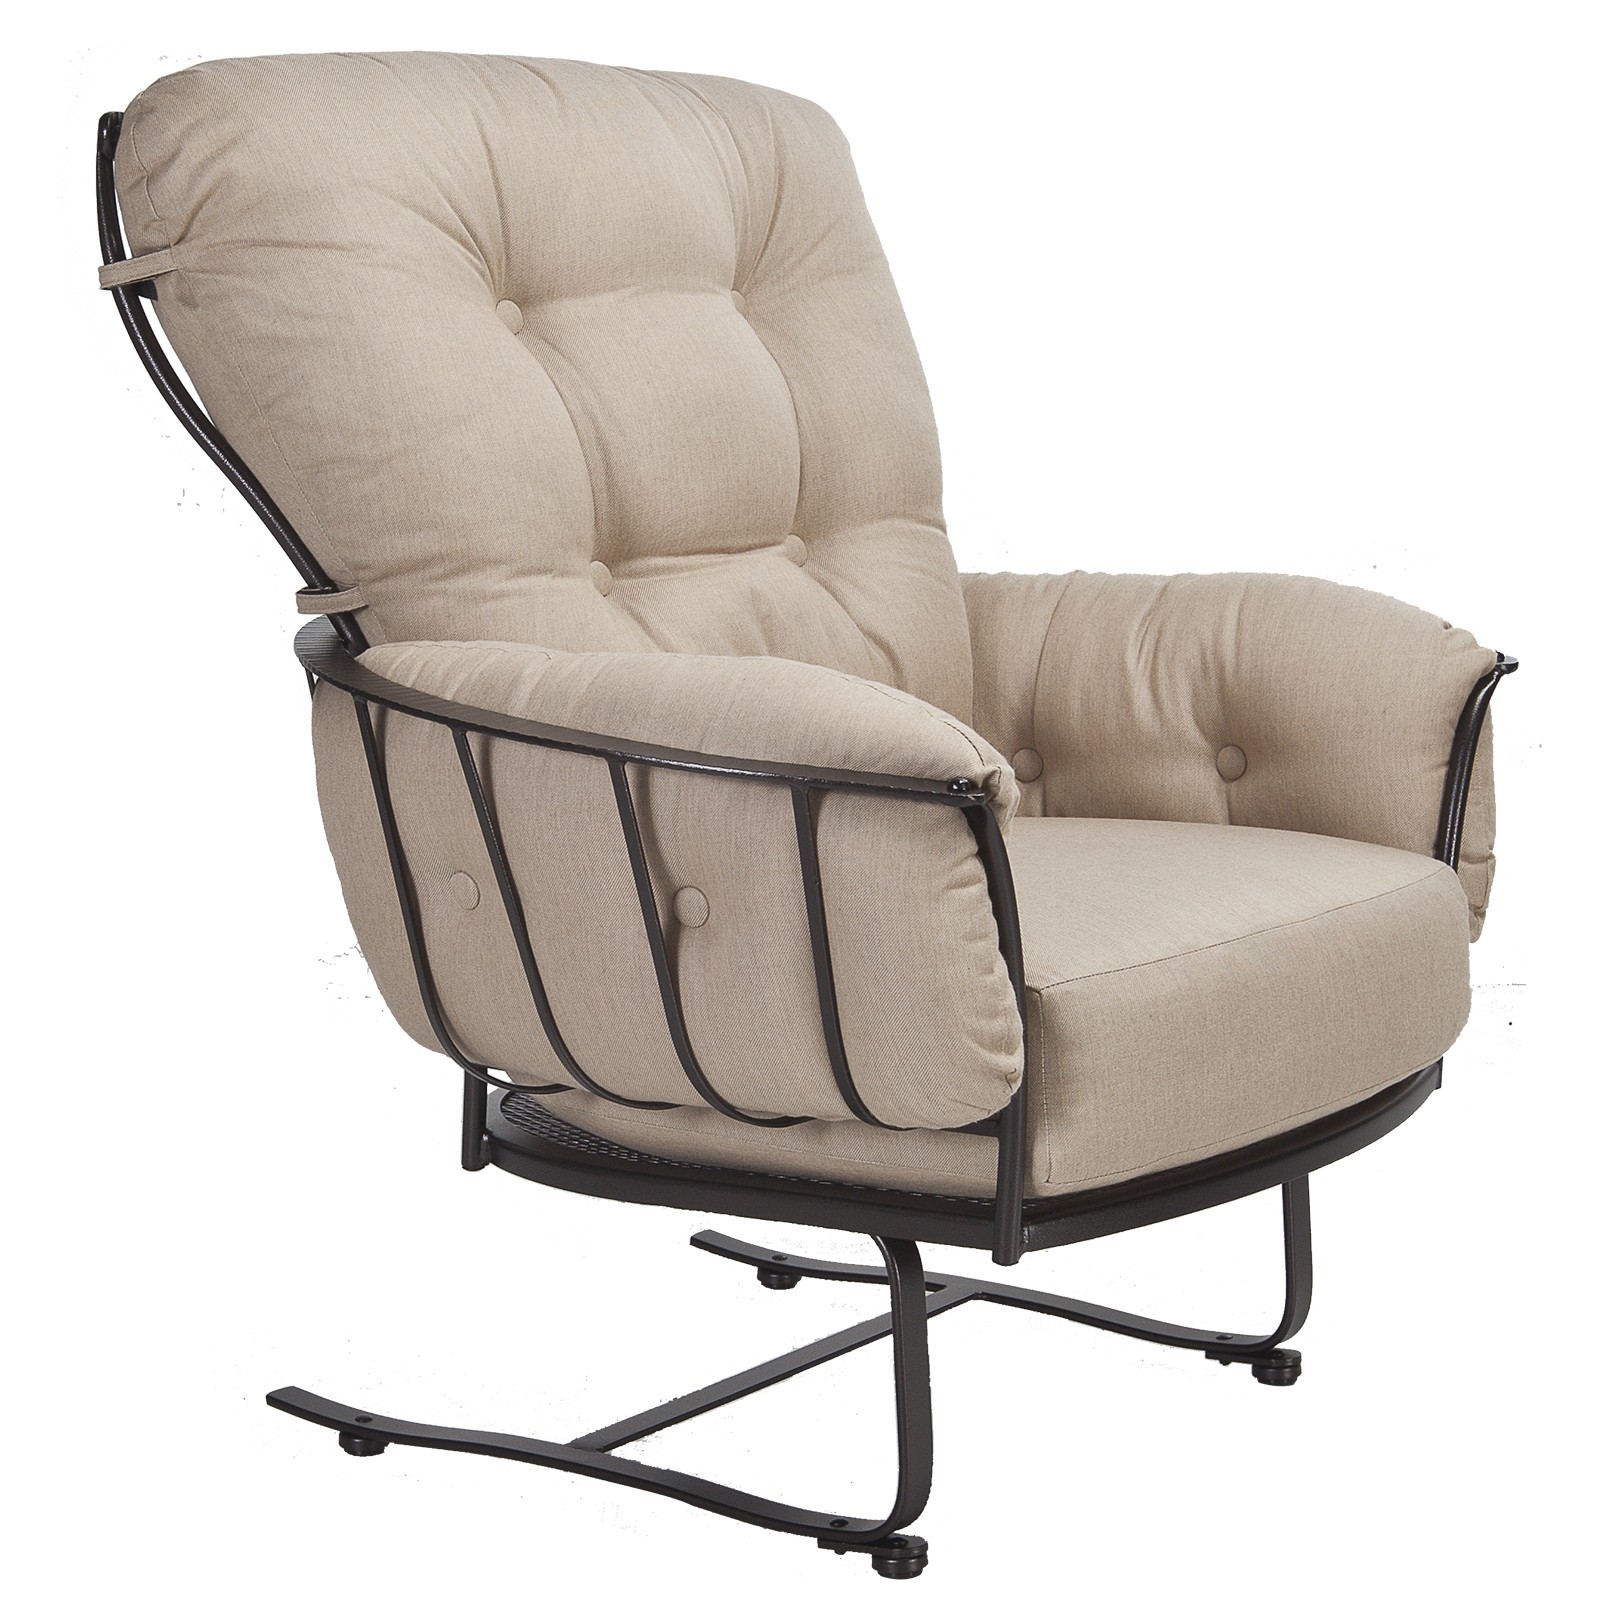 Monterra spring base lounge chair hausers patio